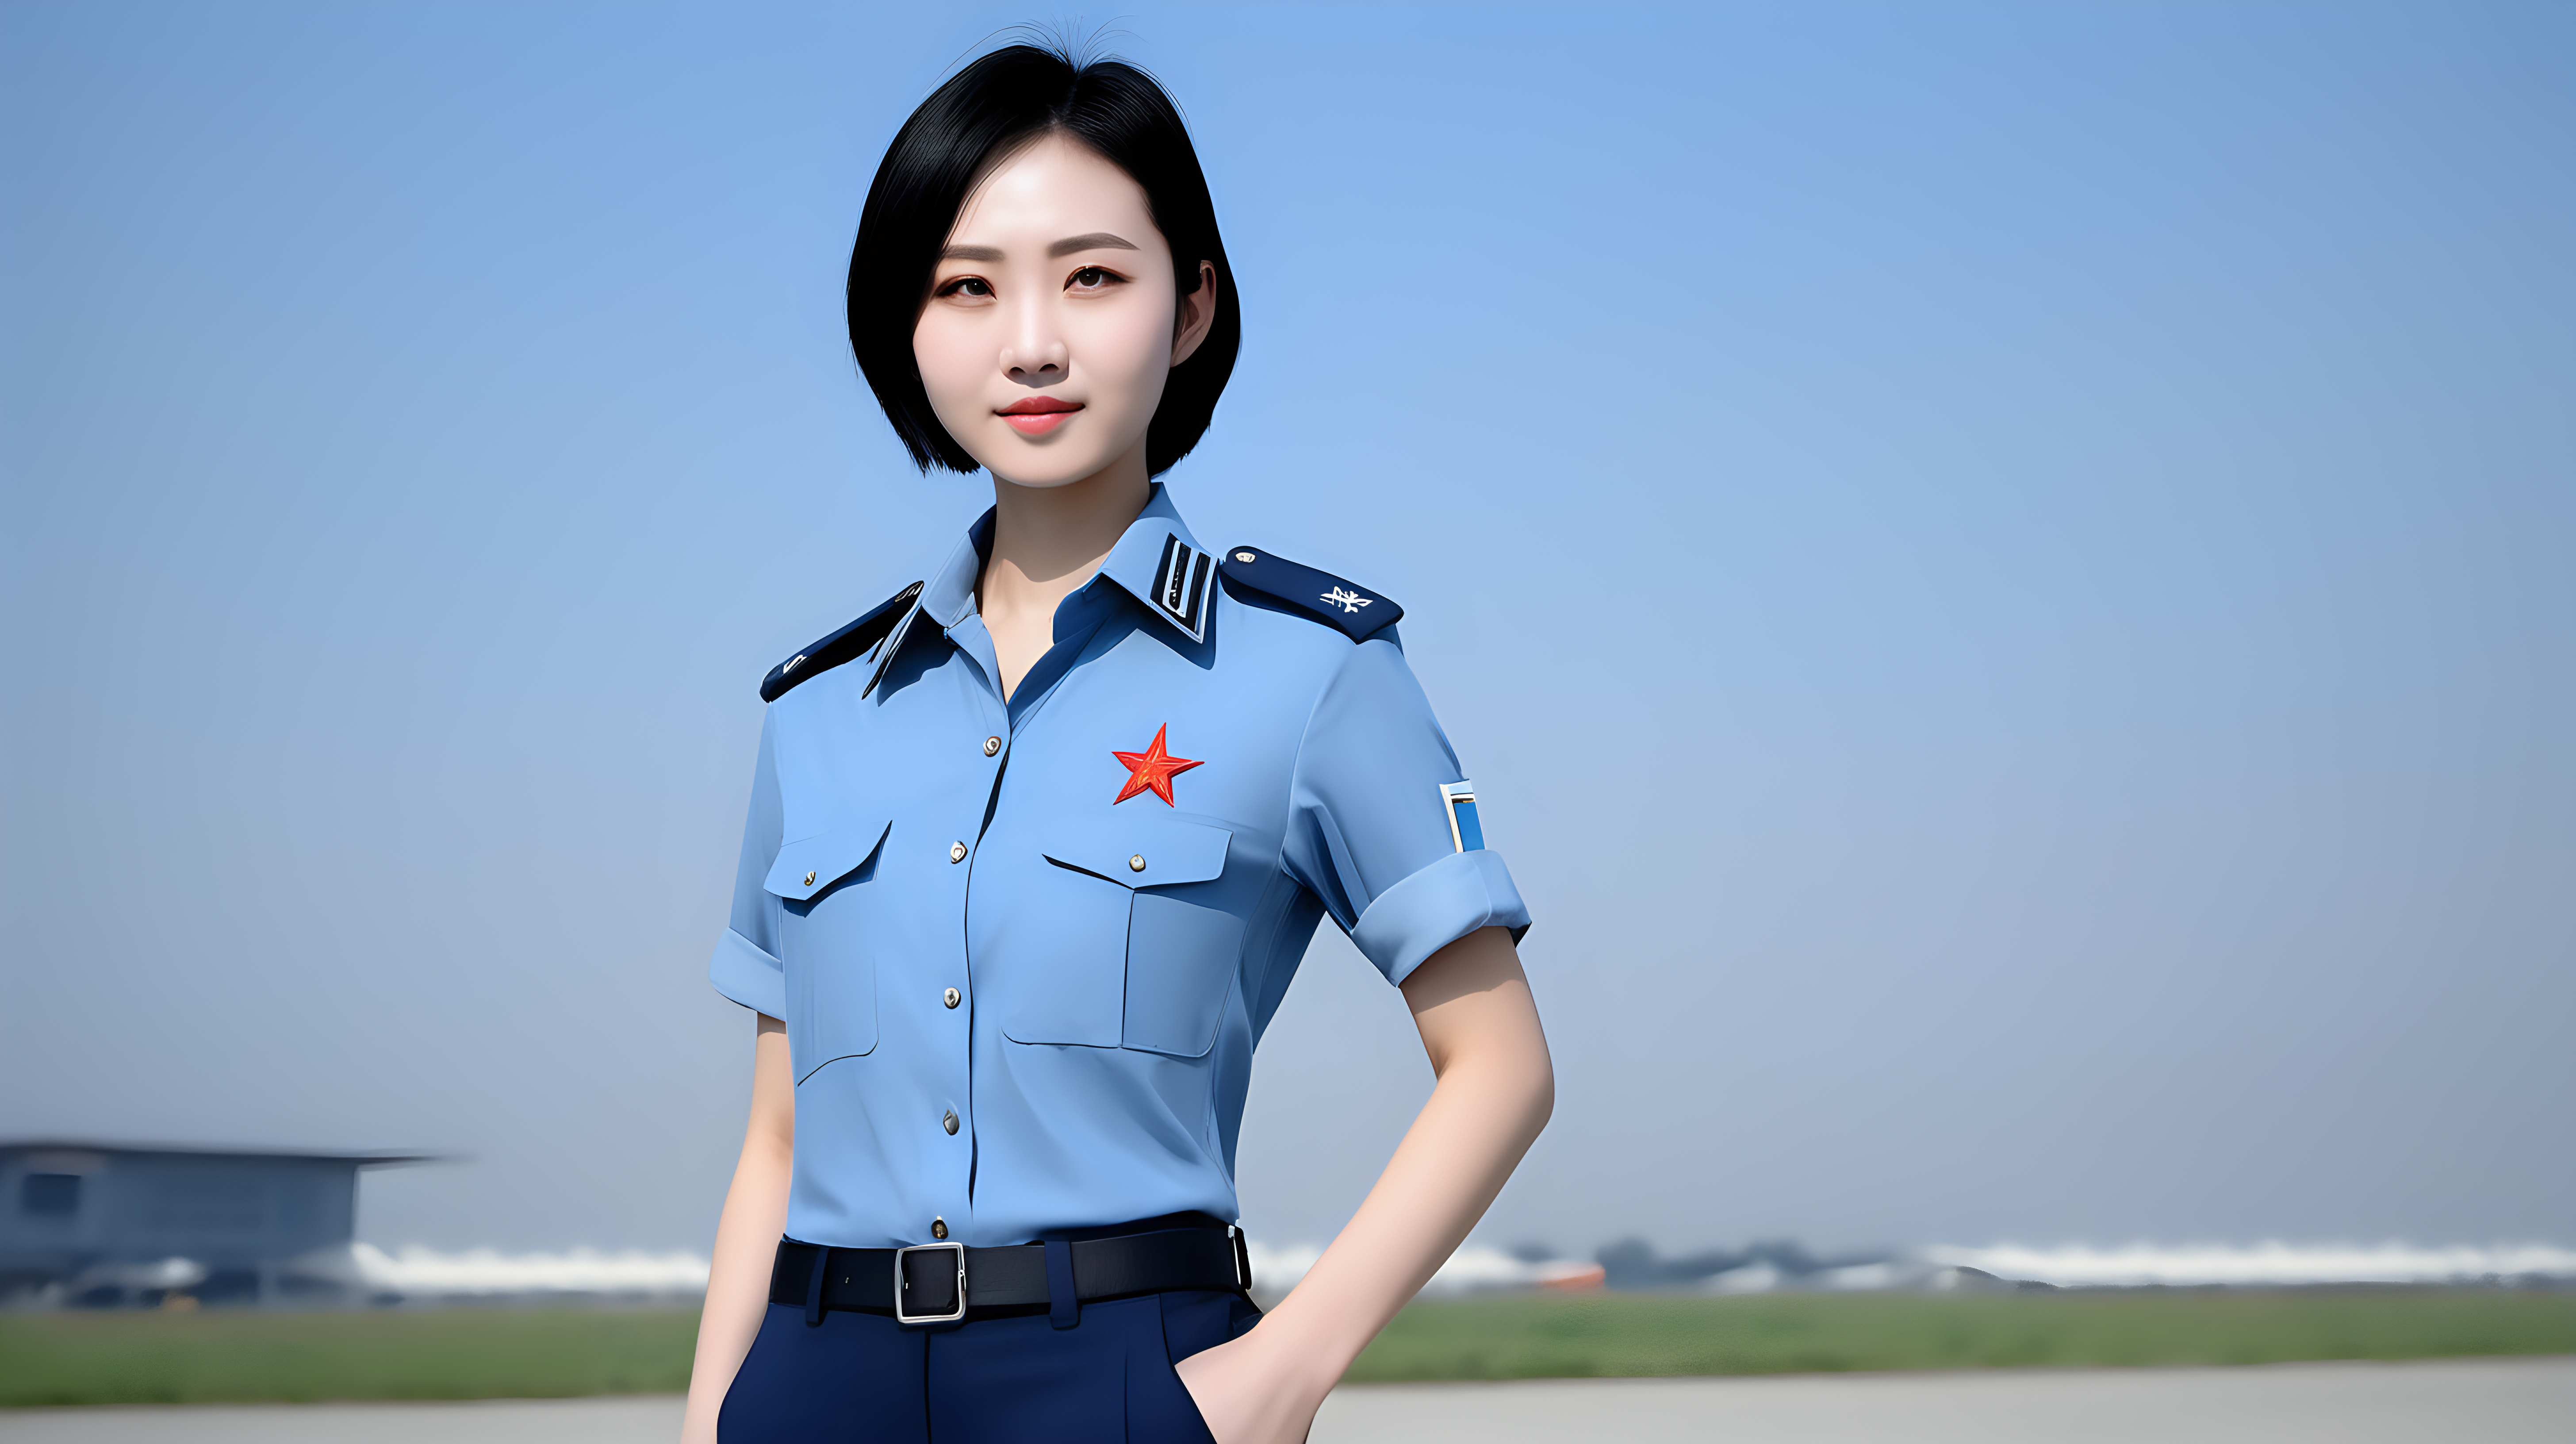 A Chinese Air Force female soldierYouthShort hairBlack hairSky